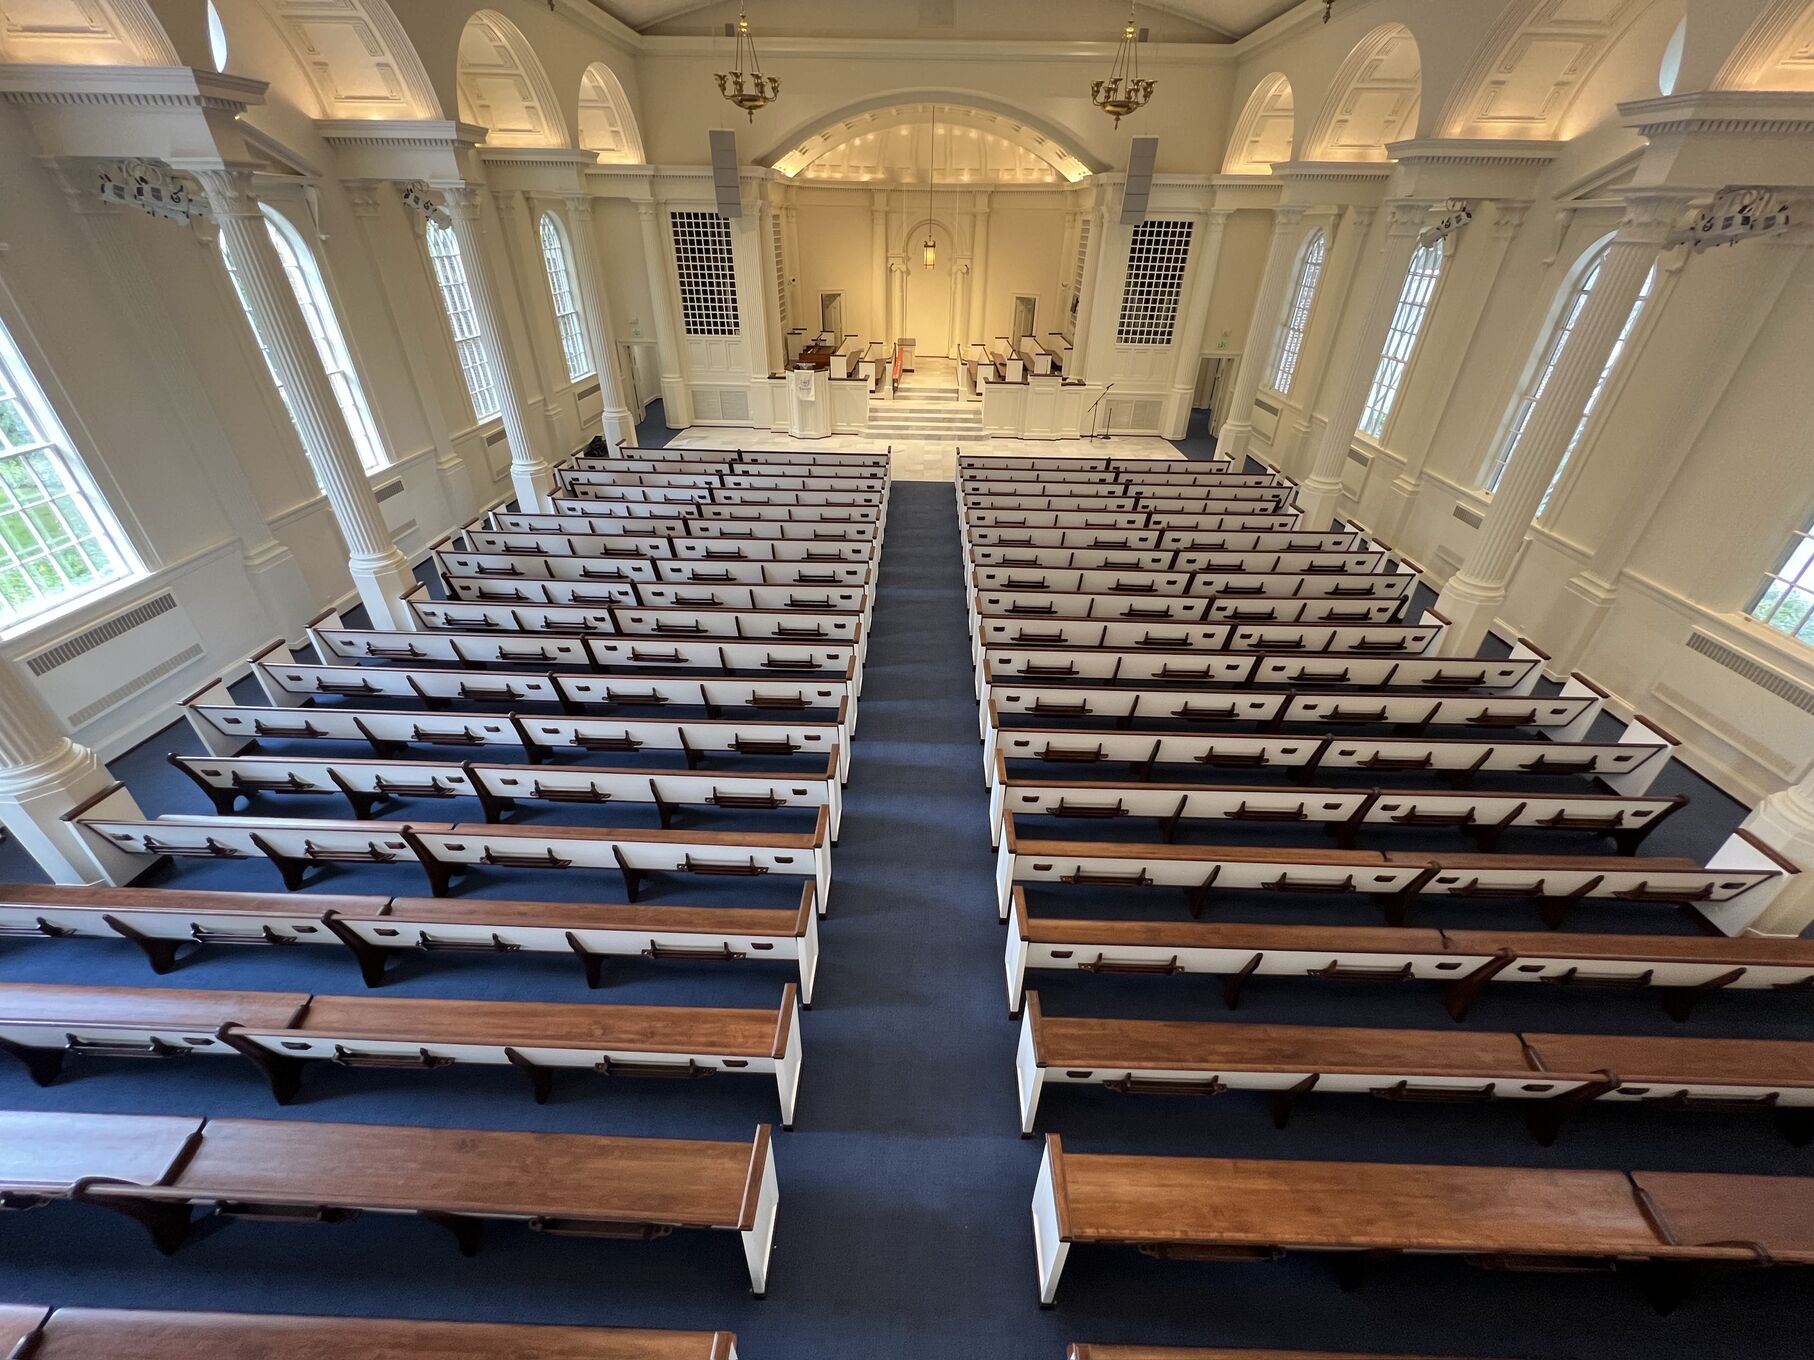 balcony view at Trinity Presbyterian in Atlanta, Georgia after the pews were refinished by Woods Church Interiors